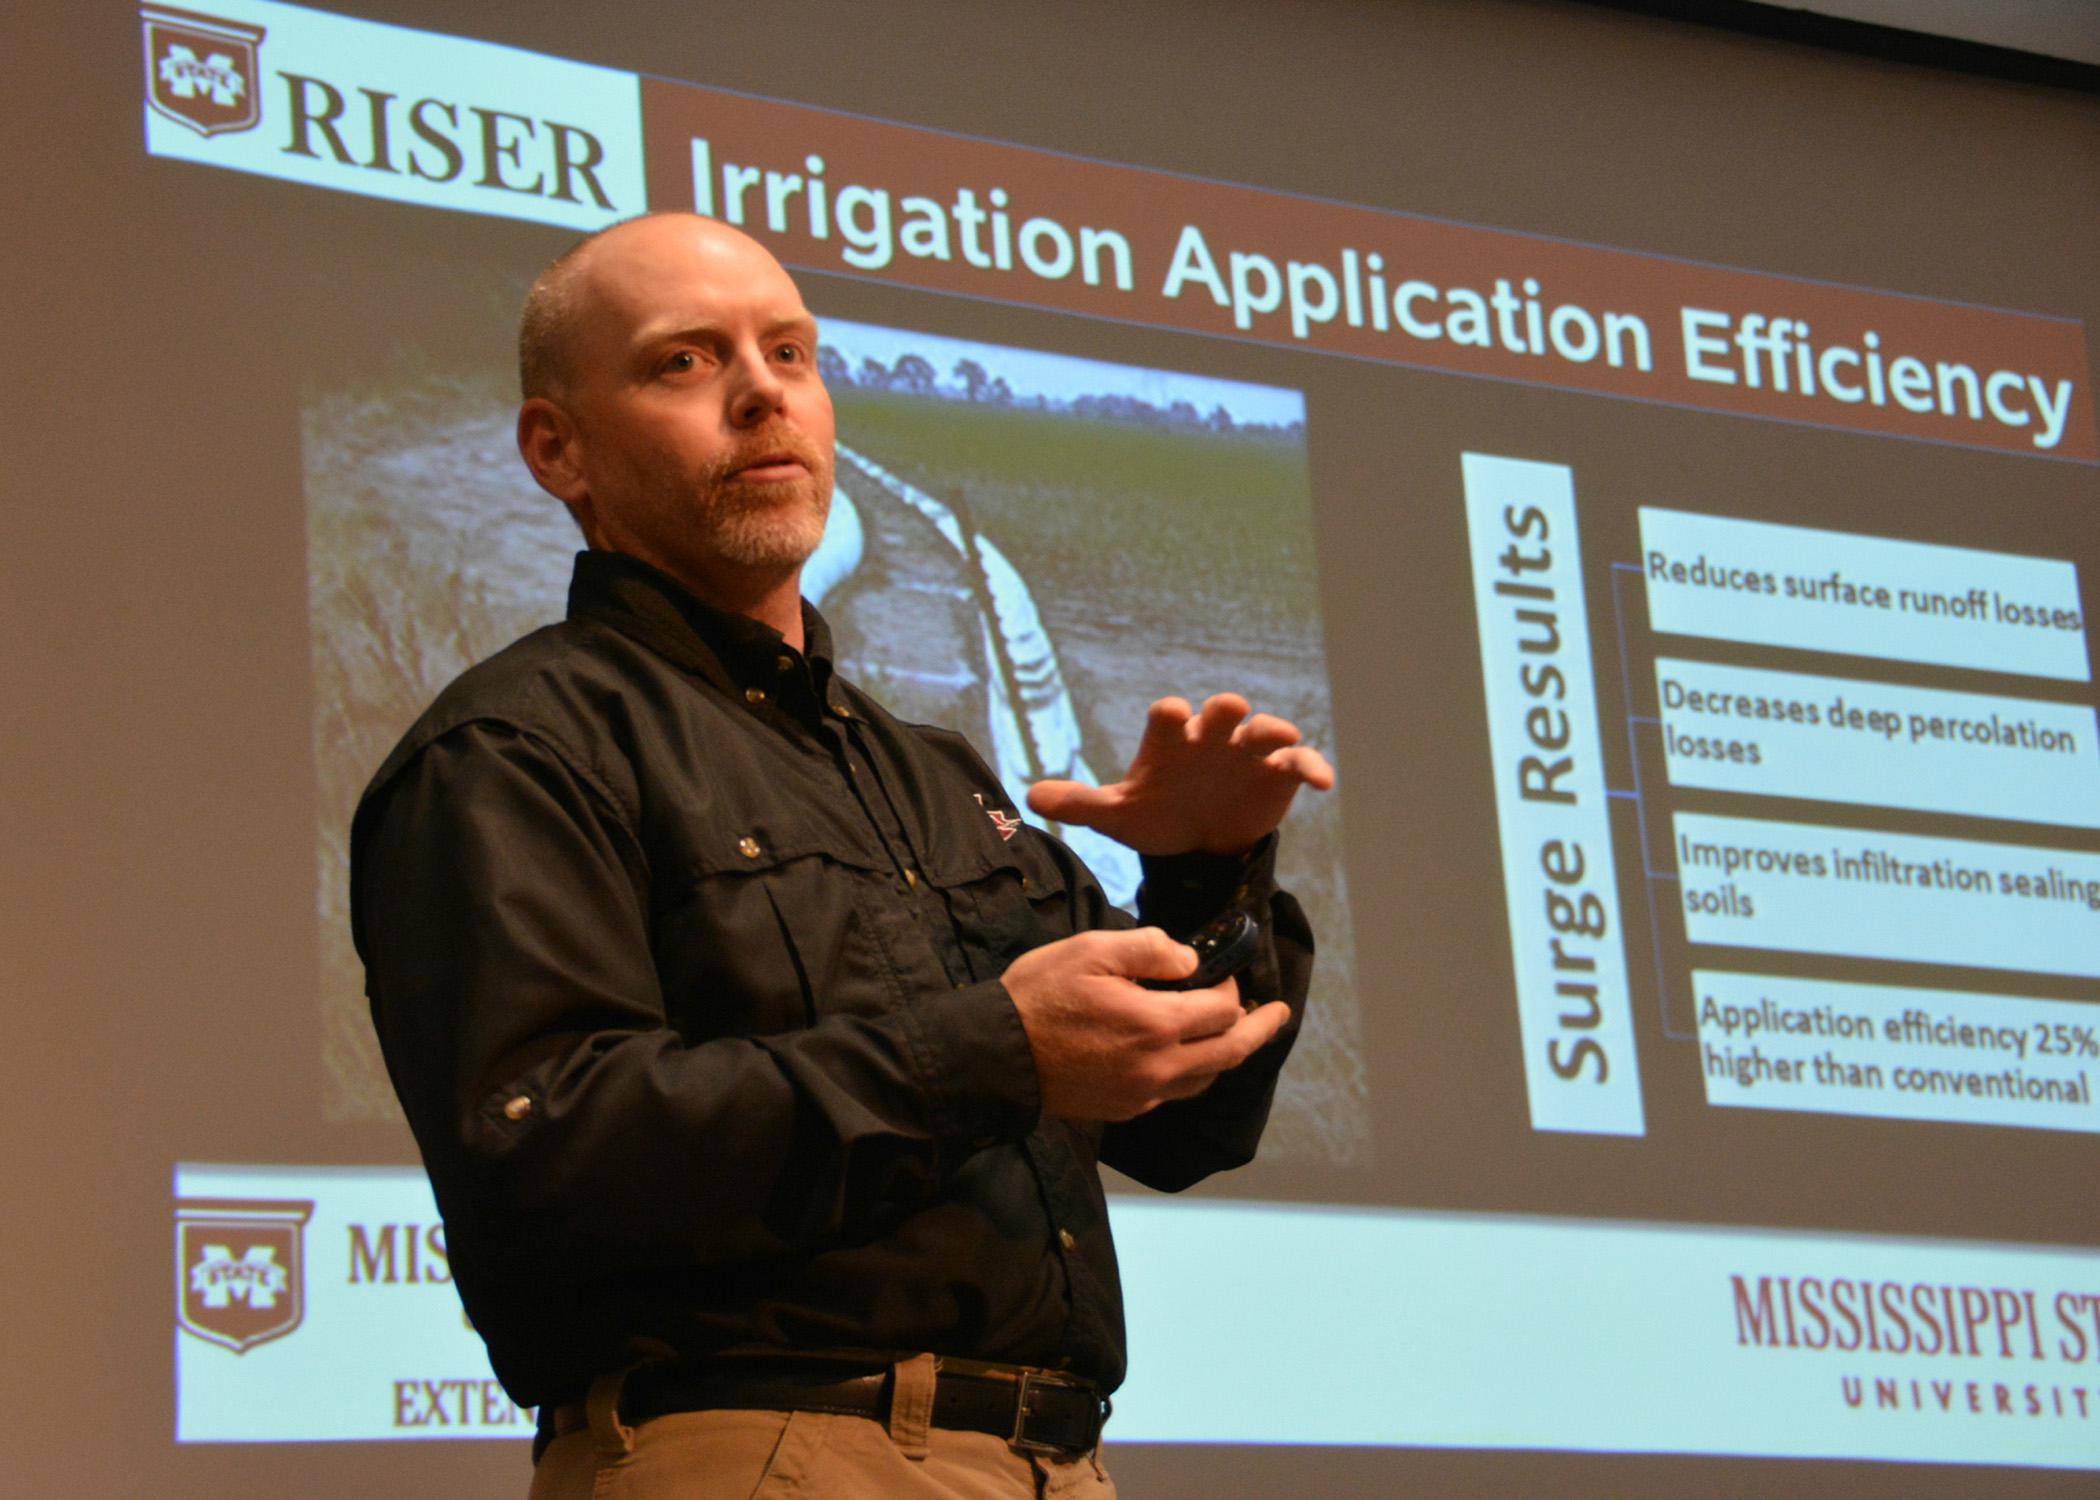 Jason Krutz, irrigation specialist with the Mississippi State University Extension Service, addresses water efficiency on cropland during the Mississippi Delta Irrigation Summit in Stoneville, Mississippi, on Dec. 10, 2014. (Photo by MSU Ag Communications/Linda Breazeale)